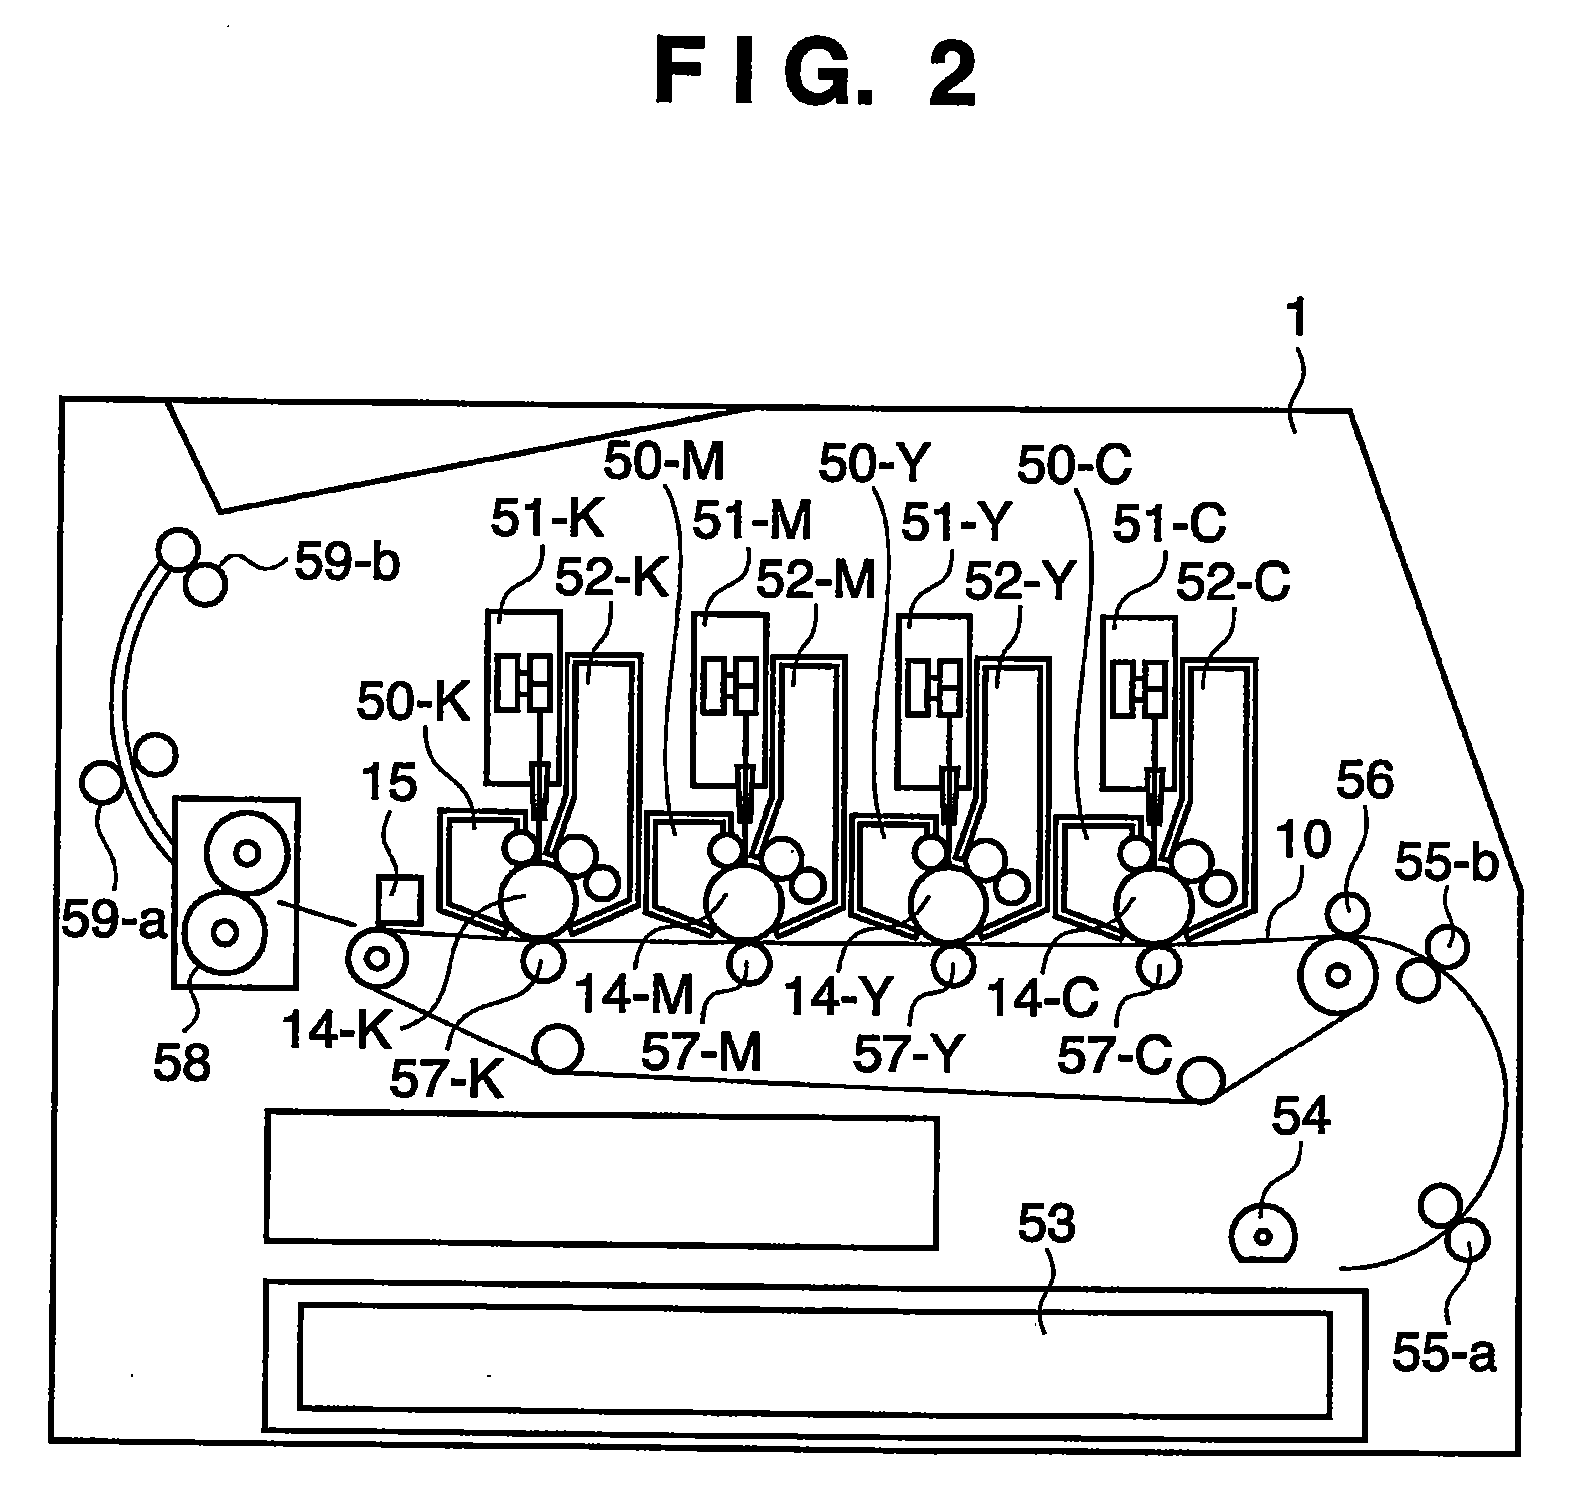 Image forming apparatus and its control method, and computer program and computer readable storage medium